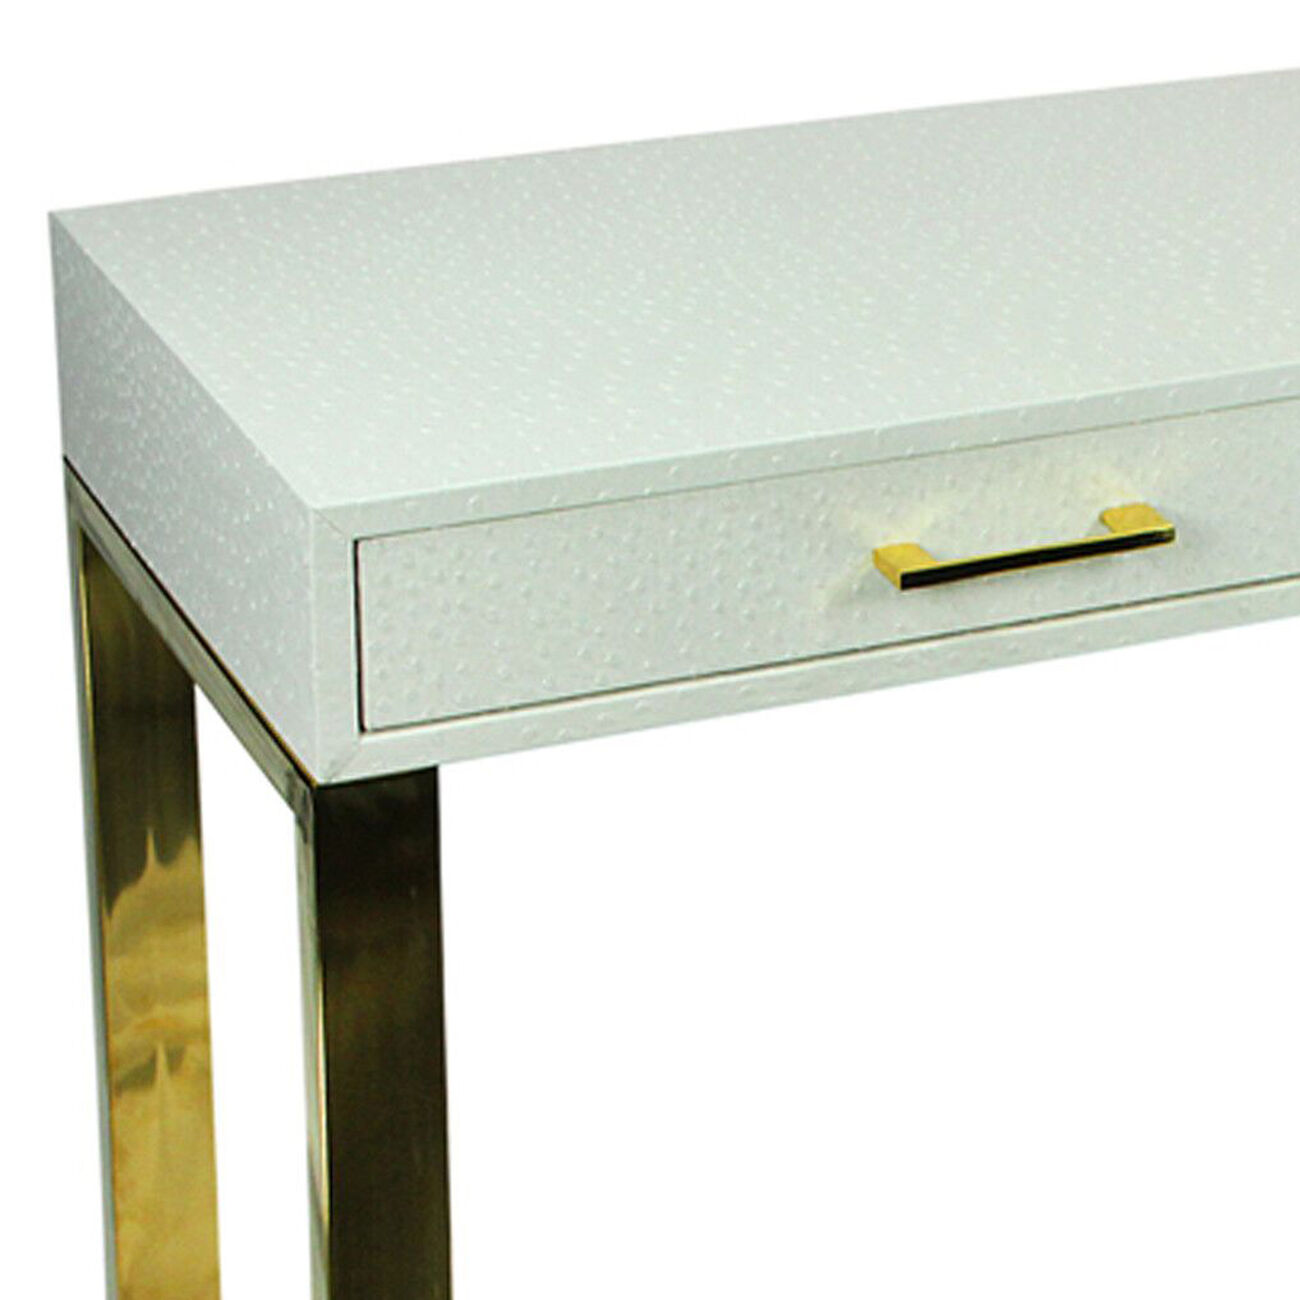 Rectangular Wood and Metal Console Table with 2 Drawers, White and Gold